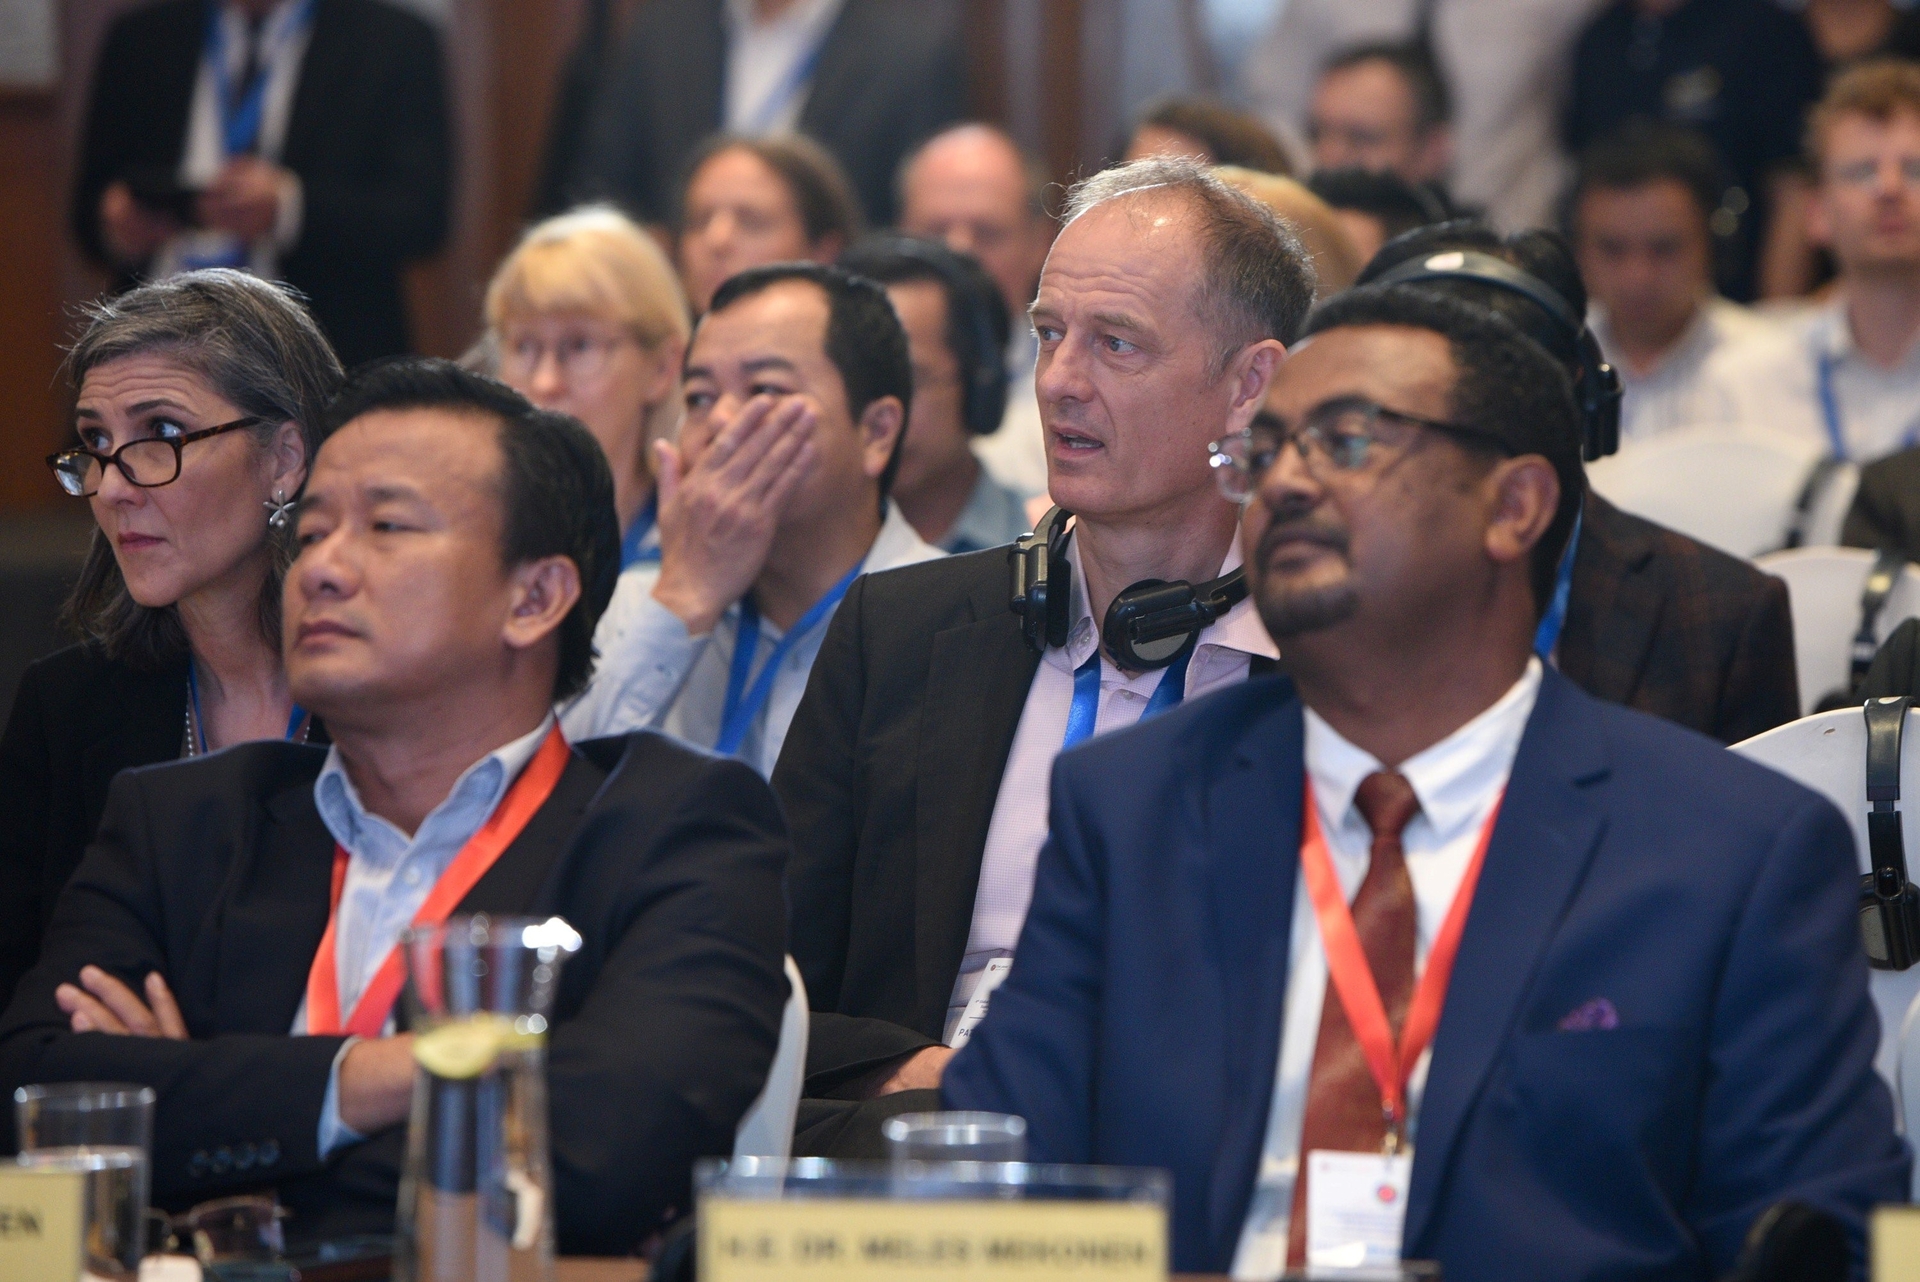 The fourth Global Conference of the One Planet network’s Sustainable Food Systems Program recently held in Hanoi, Vietnam. Photo: VAN